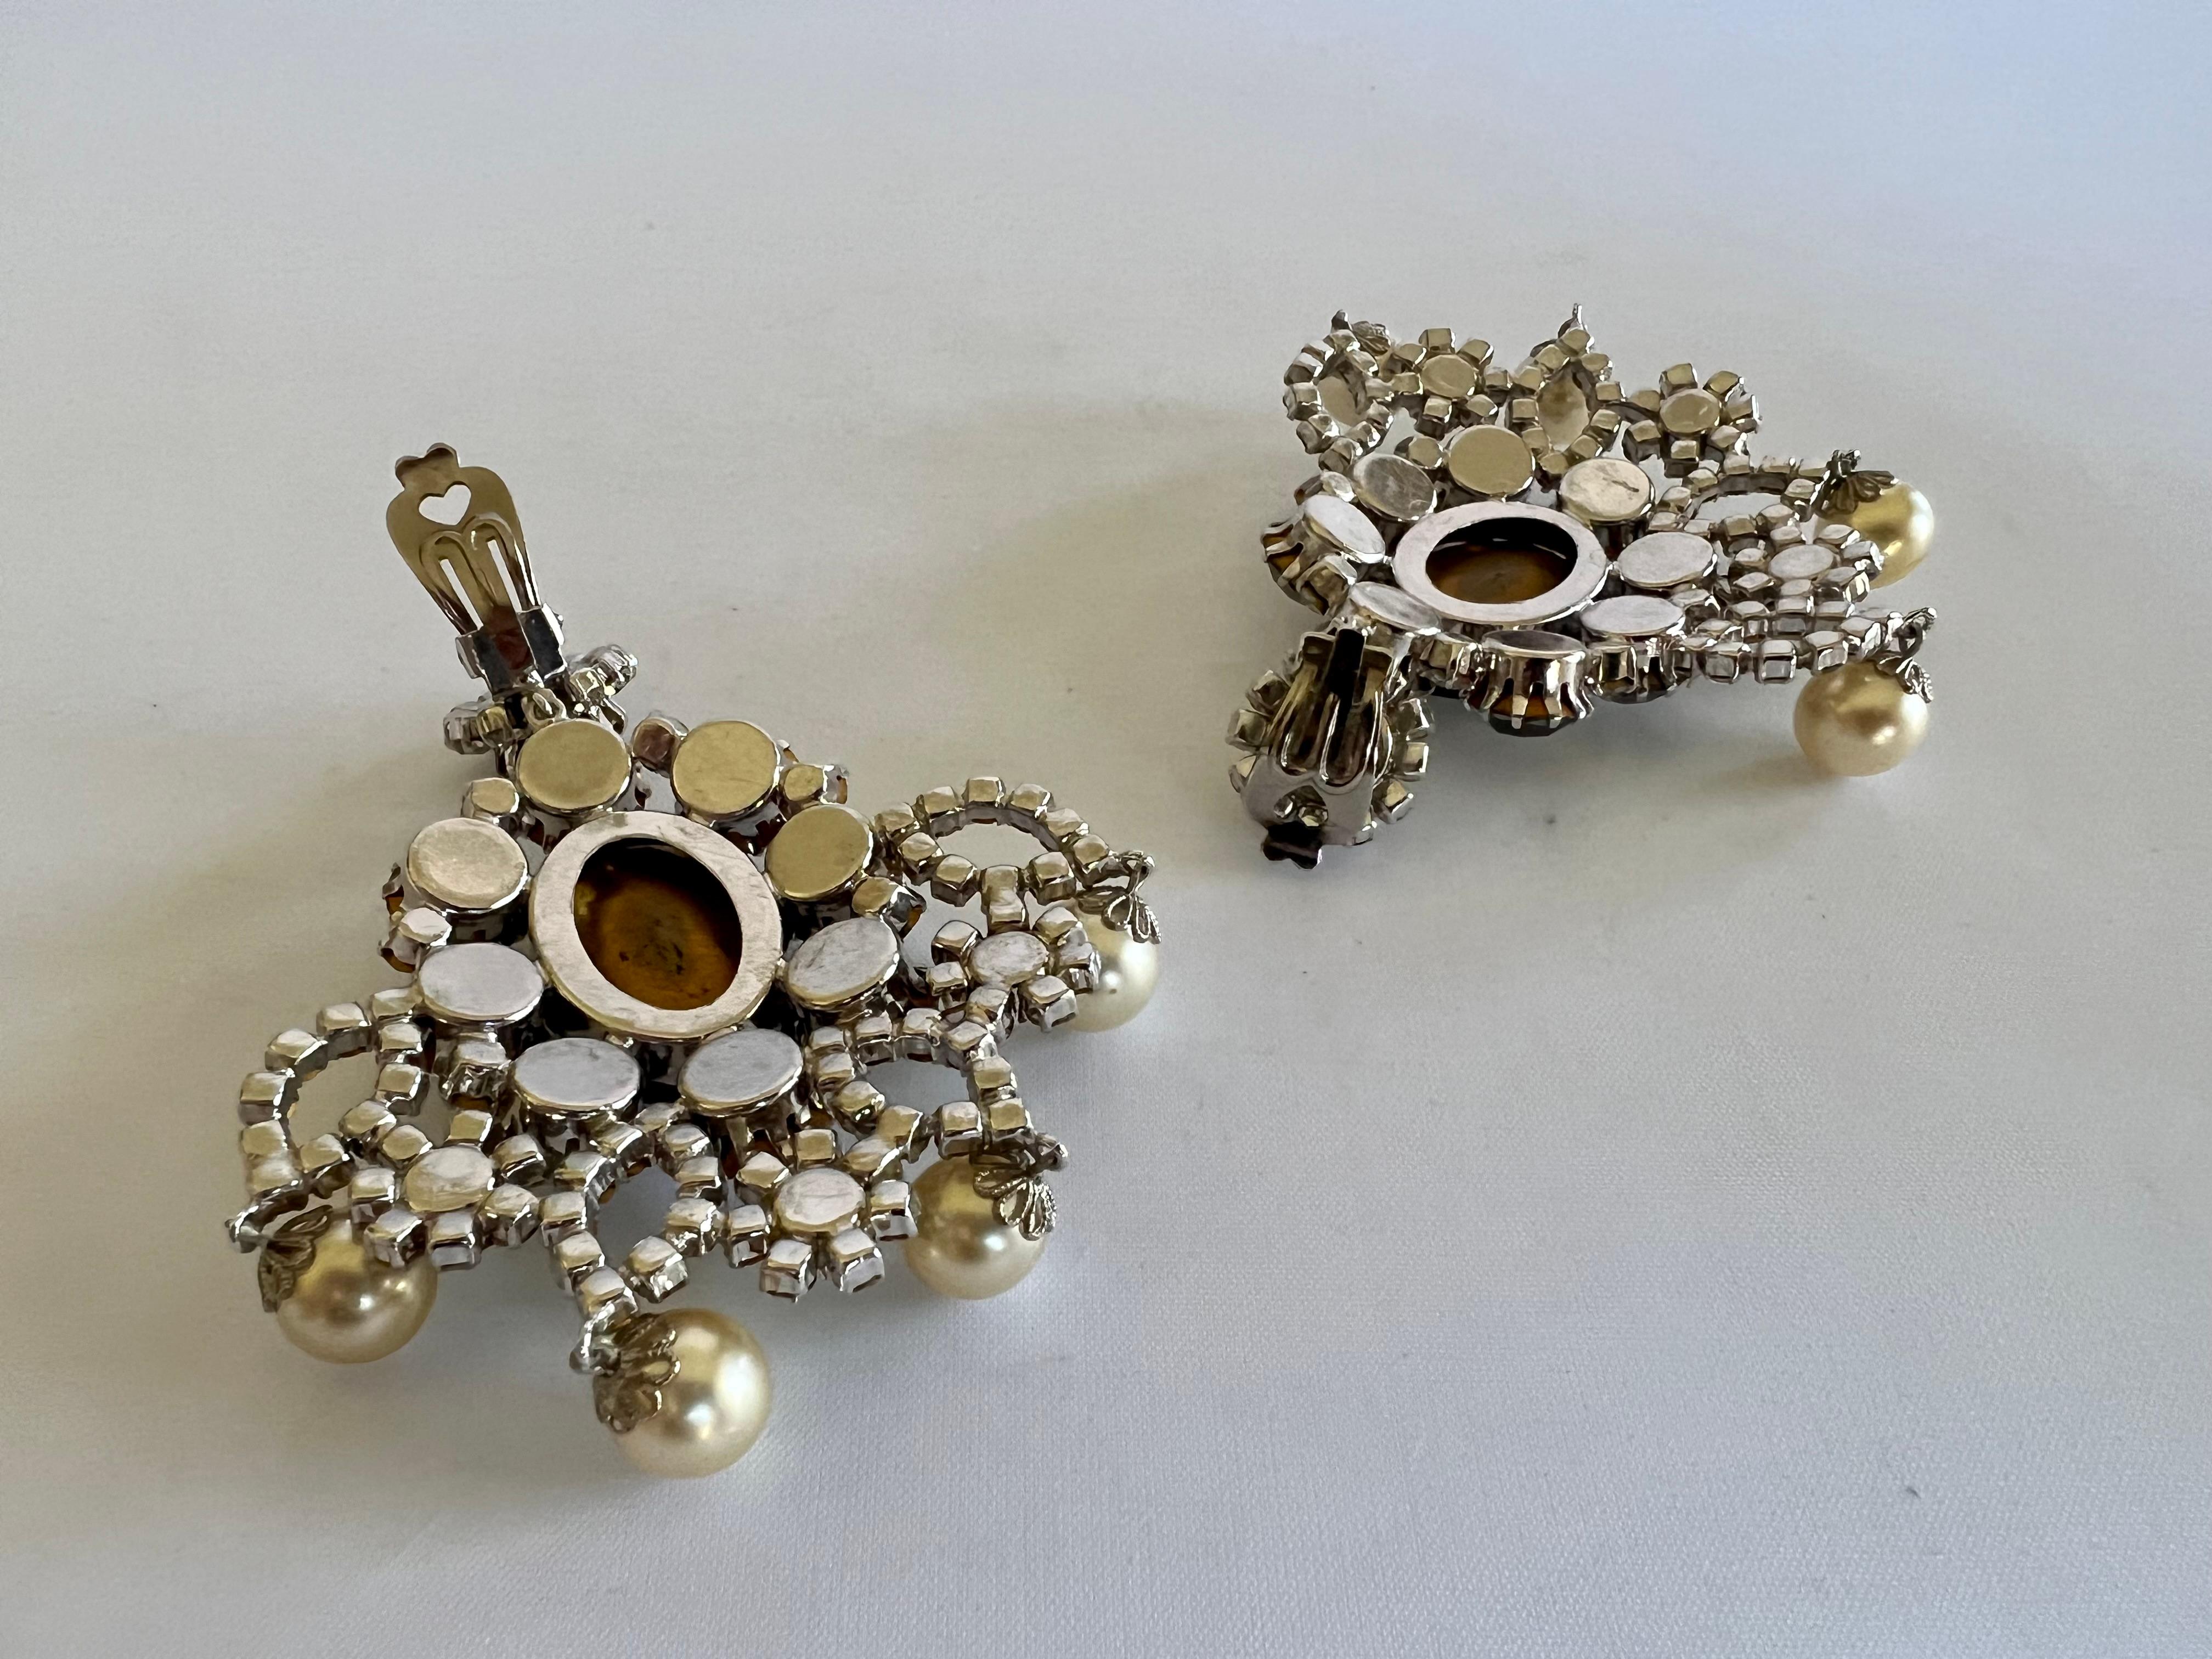 Vintage 1960's Max Muller Kaufbeuren clip-on statement earrings. Extremely rare 1960s unsigned Max Muller crystal, faux emerald, and pearls.
 Max Muller was a German jewelry designer who designed and manufactured for couture houses such as Christian